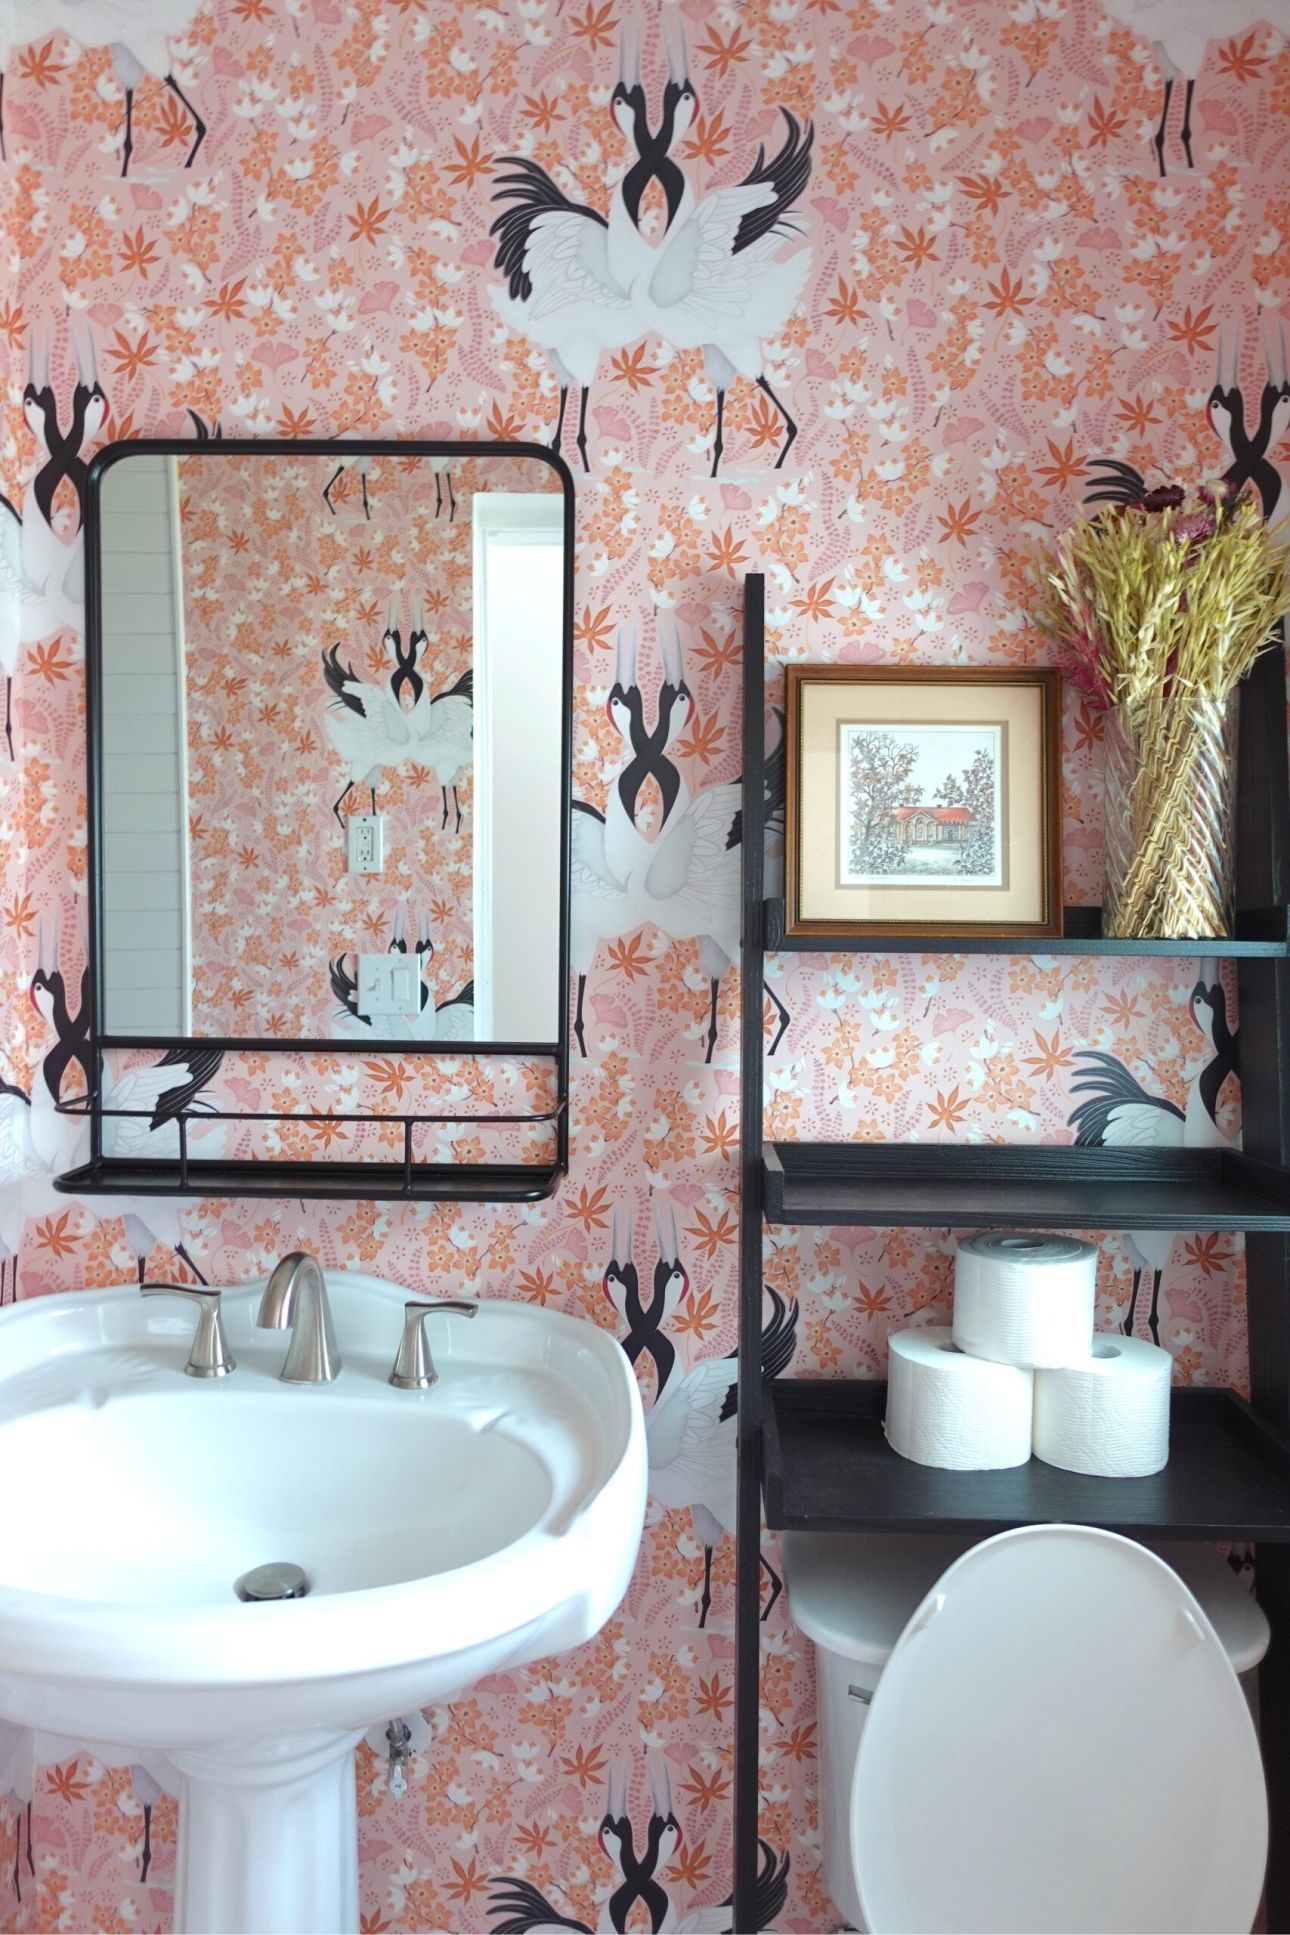 Light pink & floral Japanese cranes installed in a bathroom